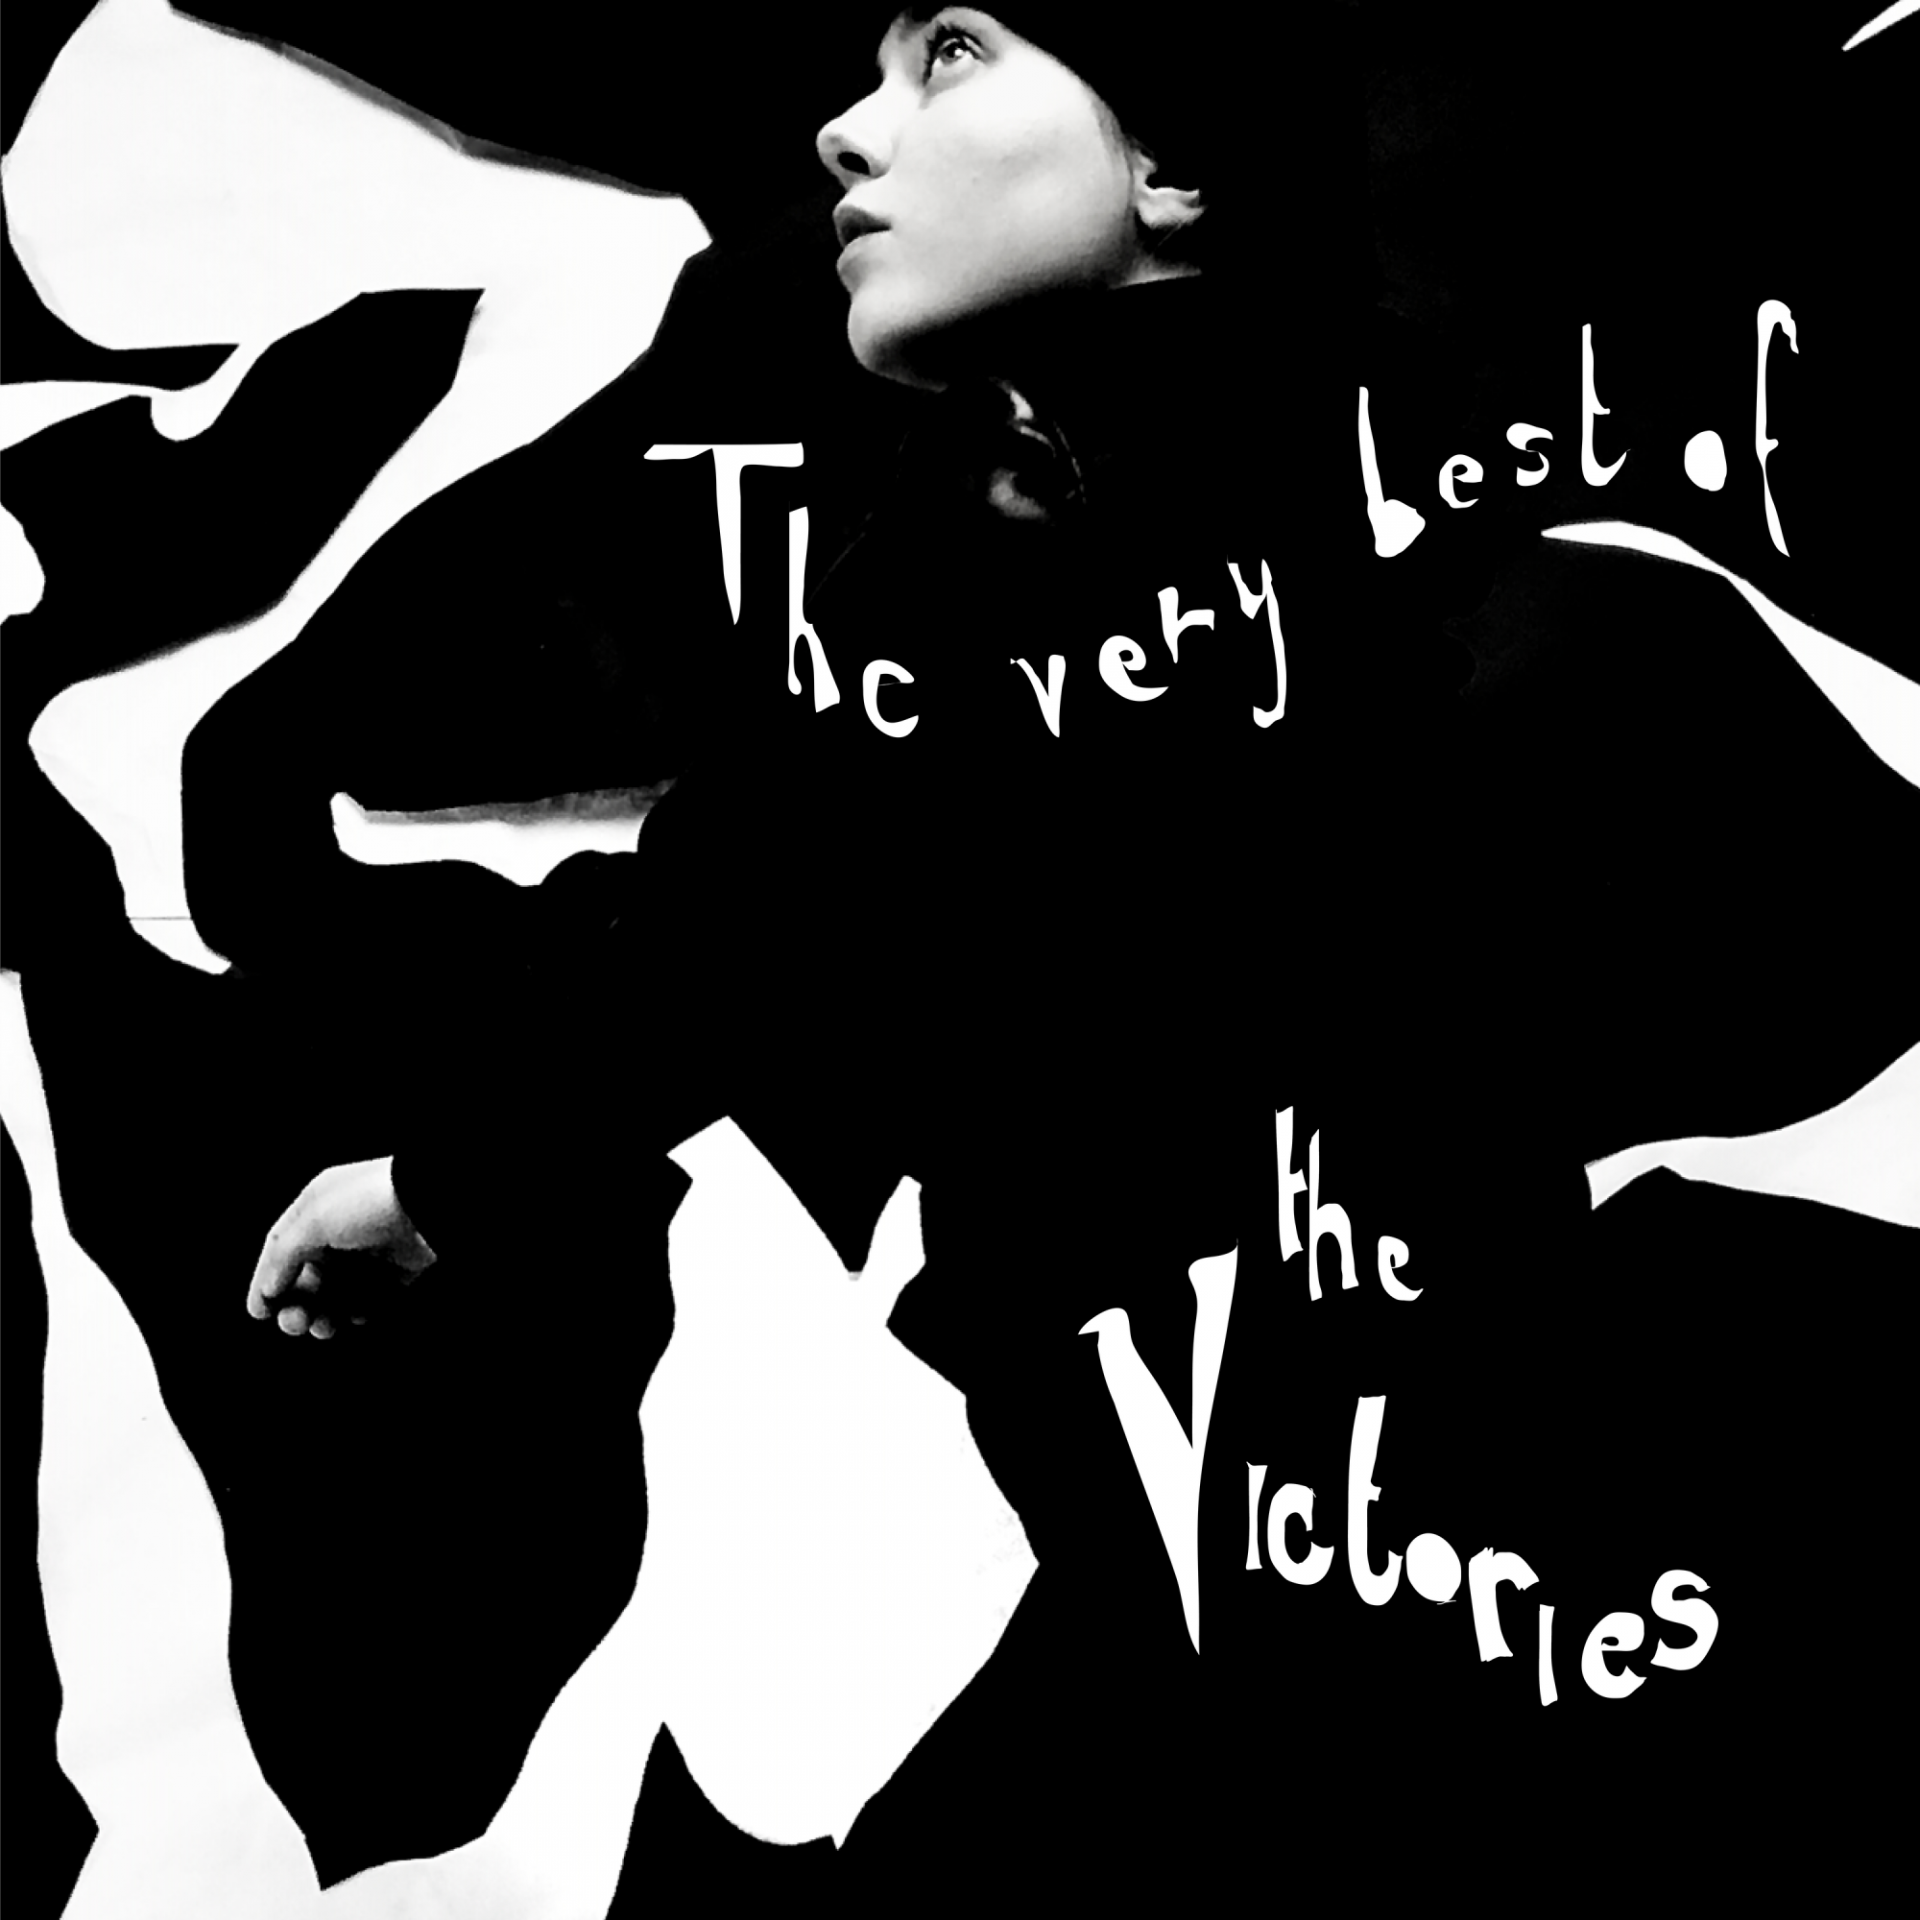 Record album cover: 'The Very best off' by the Victories